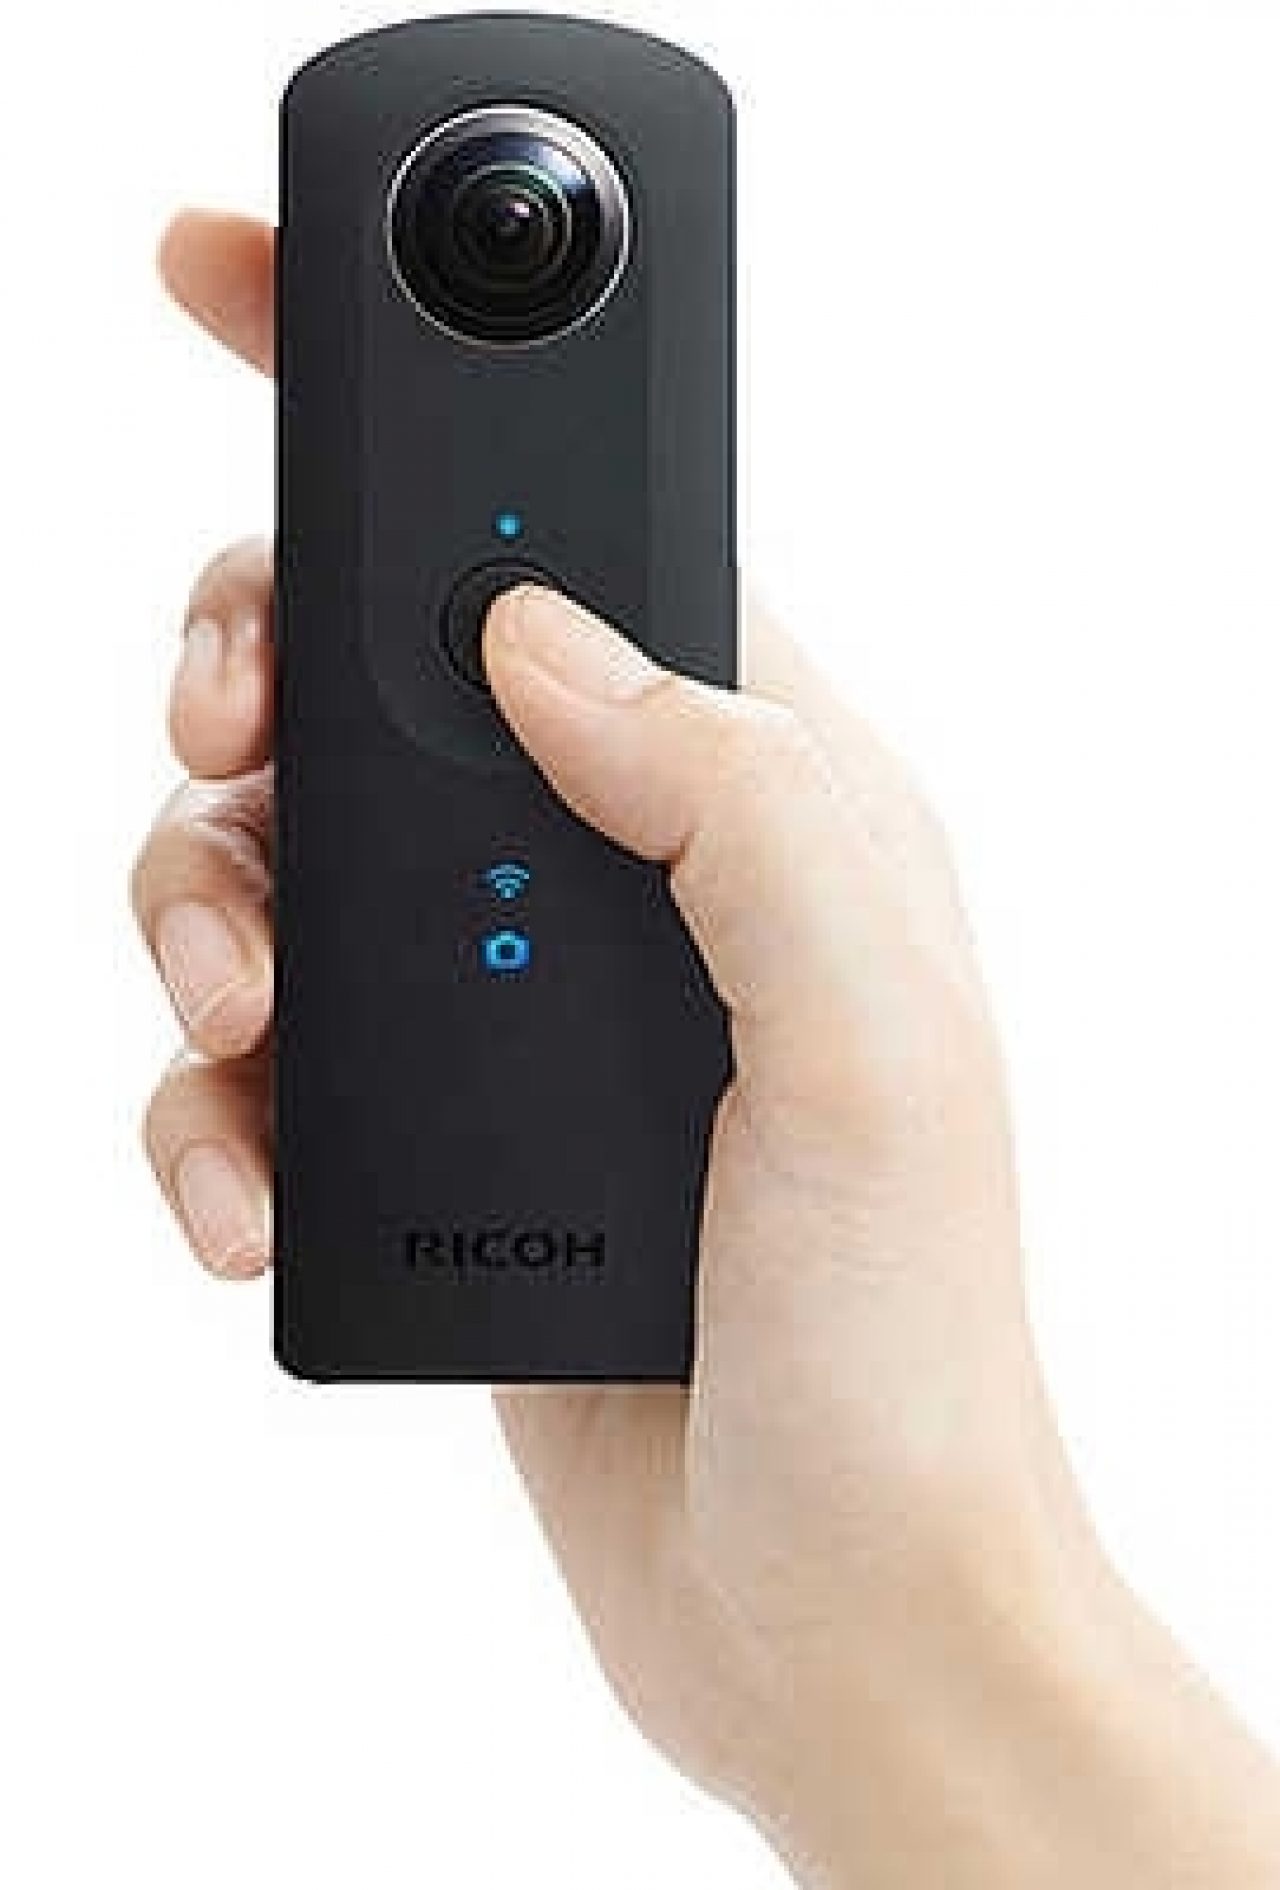 Preek Ook grond Ricoh Theta S Review | Photography Blog